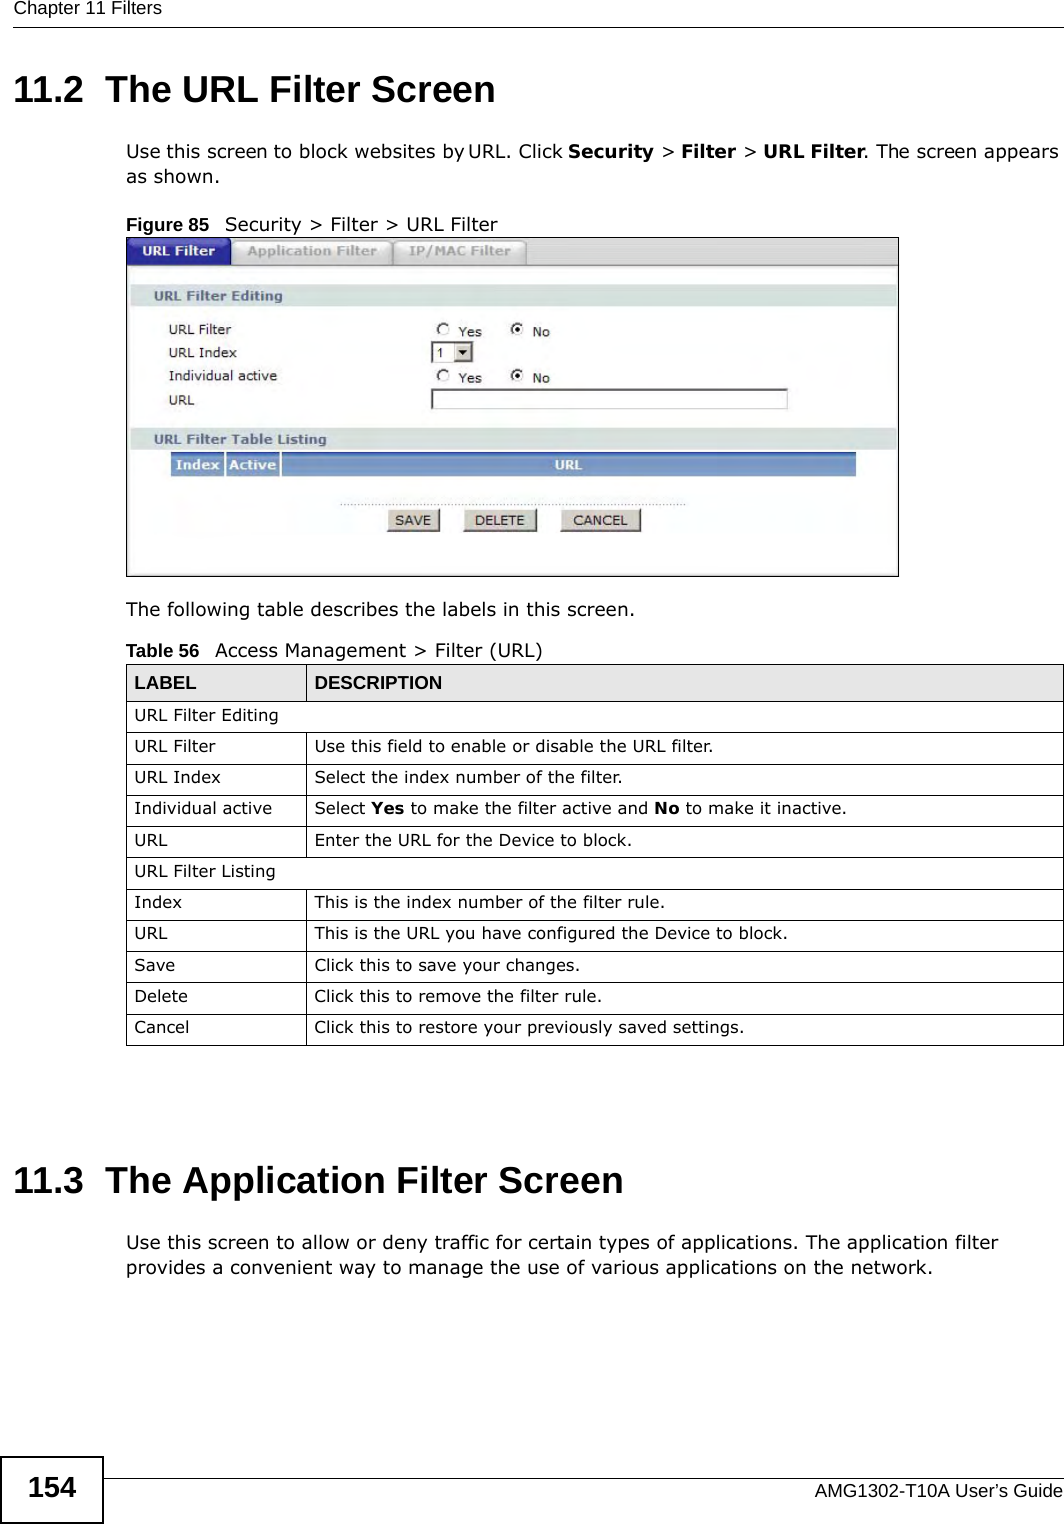 Chapter 11 FiltersAMG1302-T10A User’s Guide15411.2  The URL Filter Screen Use this screen to block websites by URL. Click Security &gt; Filter &gt; URL Filter. The screen appears as shown.Figure 85   Security &gt; Filter &gt; URL FilterThe following table describes the labels in this screen.  11.3  The Application Filter ScreenUse this screen to allow or deny traffic for certain types of applications. The application filter provides a convenient way to manage the use of various applications on the network.Table 56   Access Management &gt; Filter (URL)LABEL DESCRIPTIONURL Filter EditingURL Filter Use this field to enable or disable the URL filter.URL Index Select the index number of the filter.Individual active Select Yes to make the filter active and No to make it inactive.URL Enter the URL for the Device to block.URL Filter ListingIndex This is the index number of the filter rule.URL This is the URL you have configured the Device to block.Save  Click this to save your changes.Delete Click this to remove the filter rule.Cancel Click this to restore your previously saved settings.